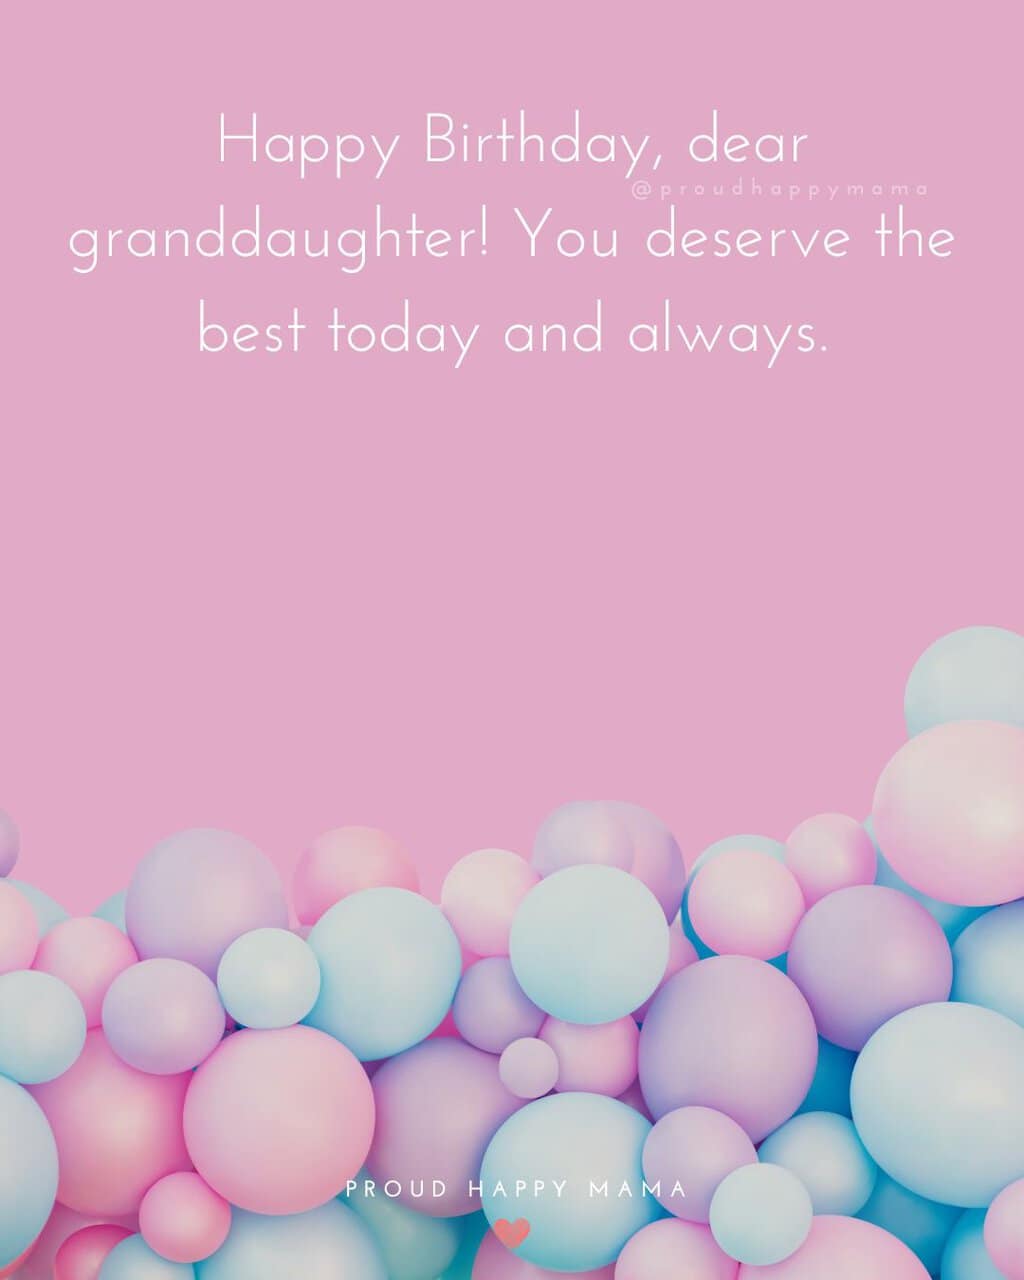 Happy Birthday, dear granddaughter! You deserve the best today and always.